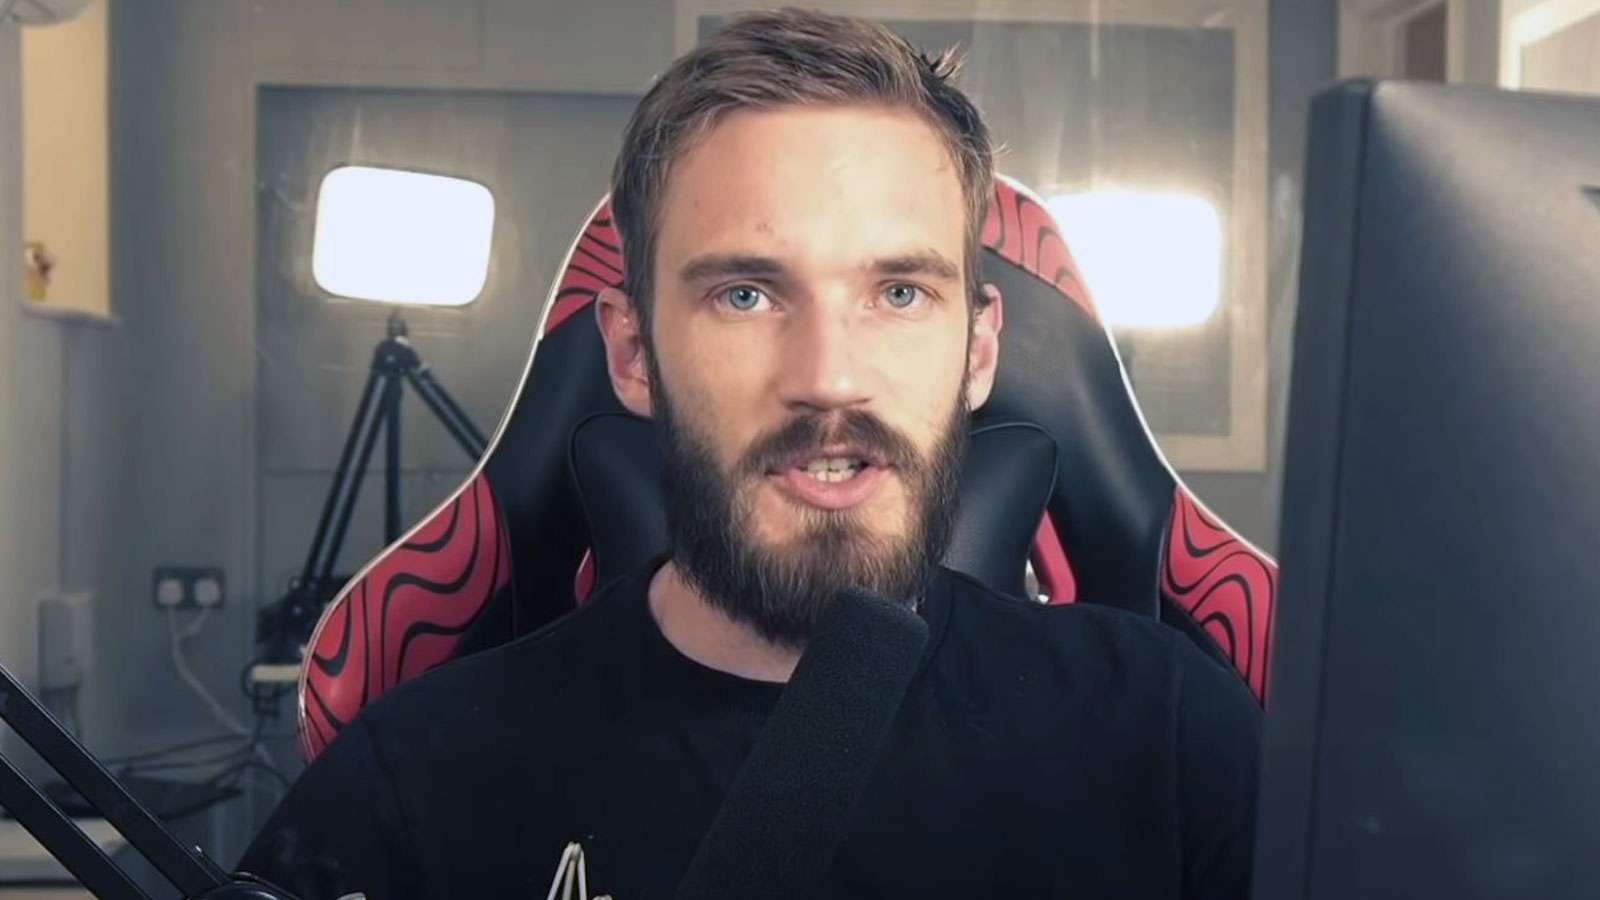 pewdiepie sitting in front of pc